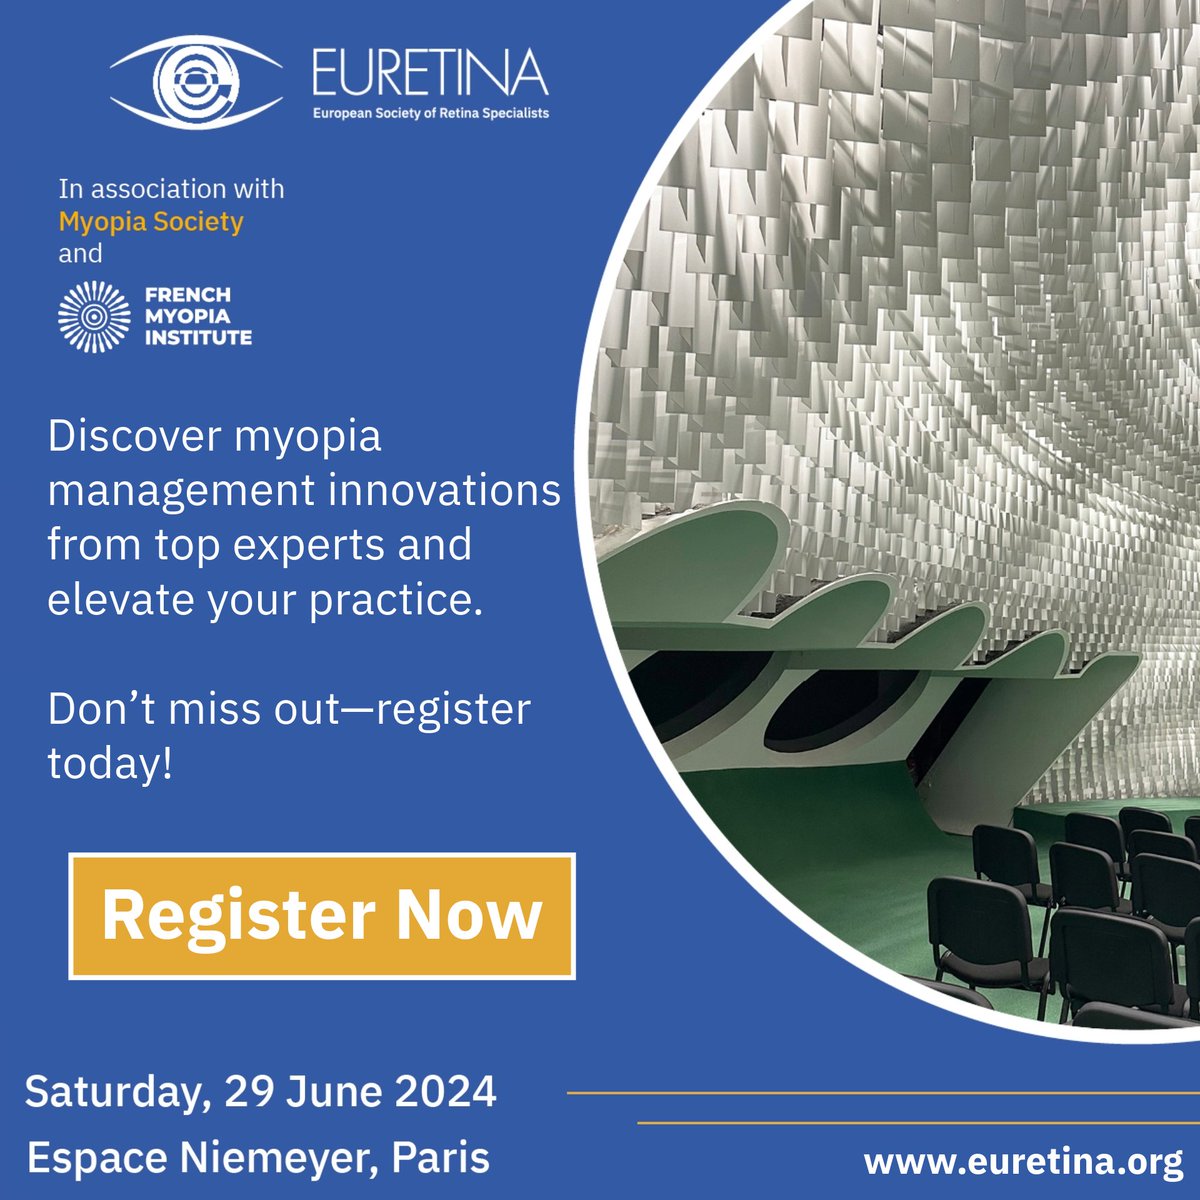 🌟 Exciting News! 📢 The program for the Euretina Special Focus Meeting on Myopia in Paris has just been released! Check out the full schedule and start planning your attendance now: ow.ly/zhsH50RGmlA #EuretinaSpecialFocus #MyopiaInnovation #Paris2024 🚀